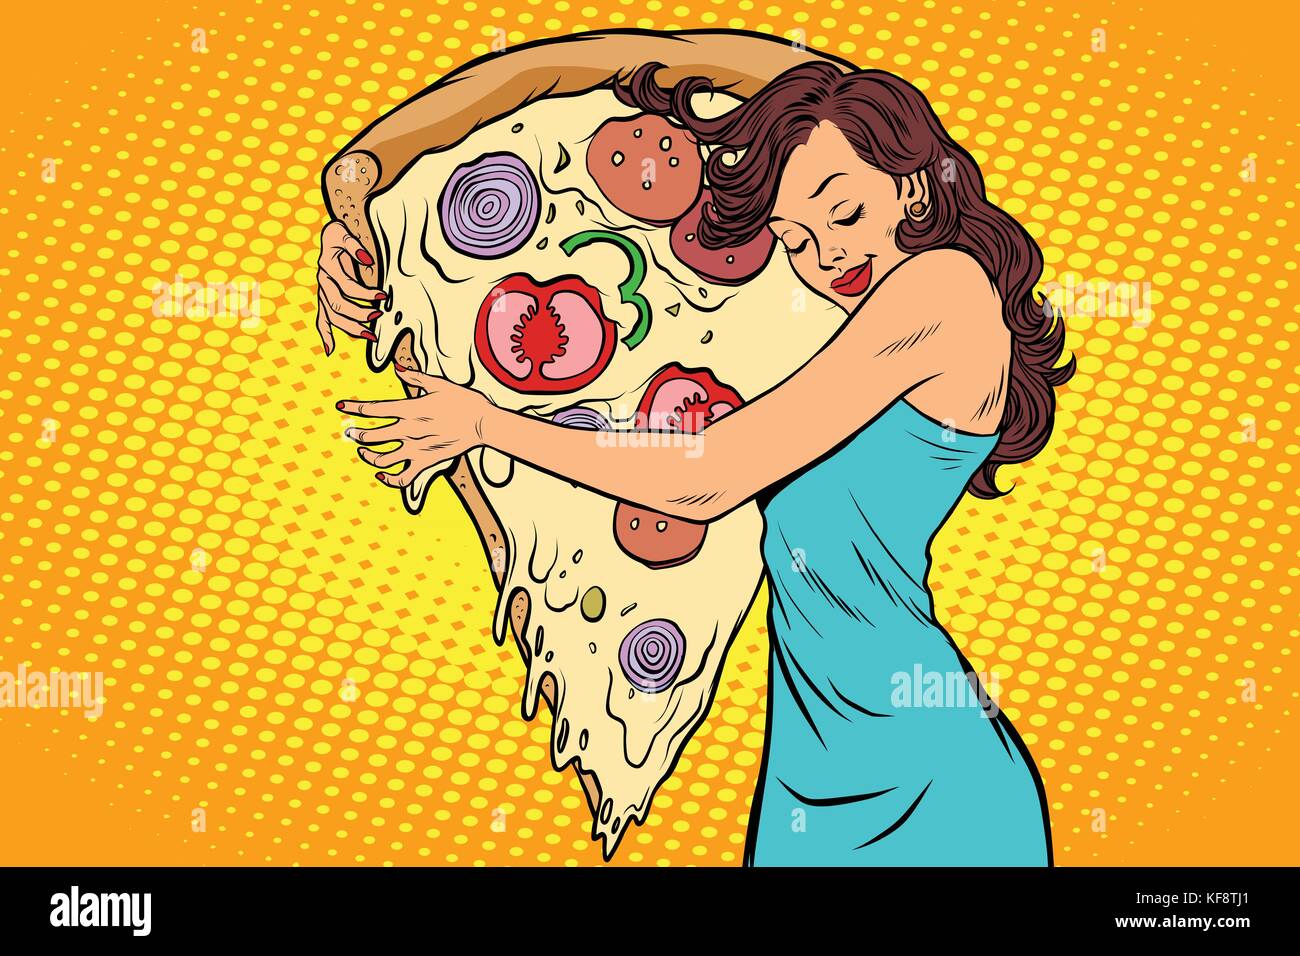 woman hugging a pizza Stock Vector